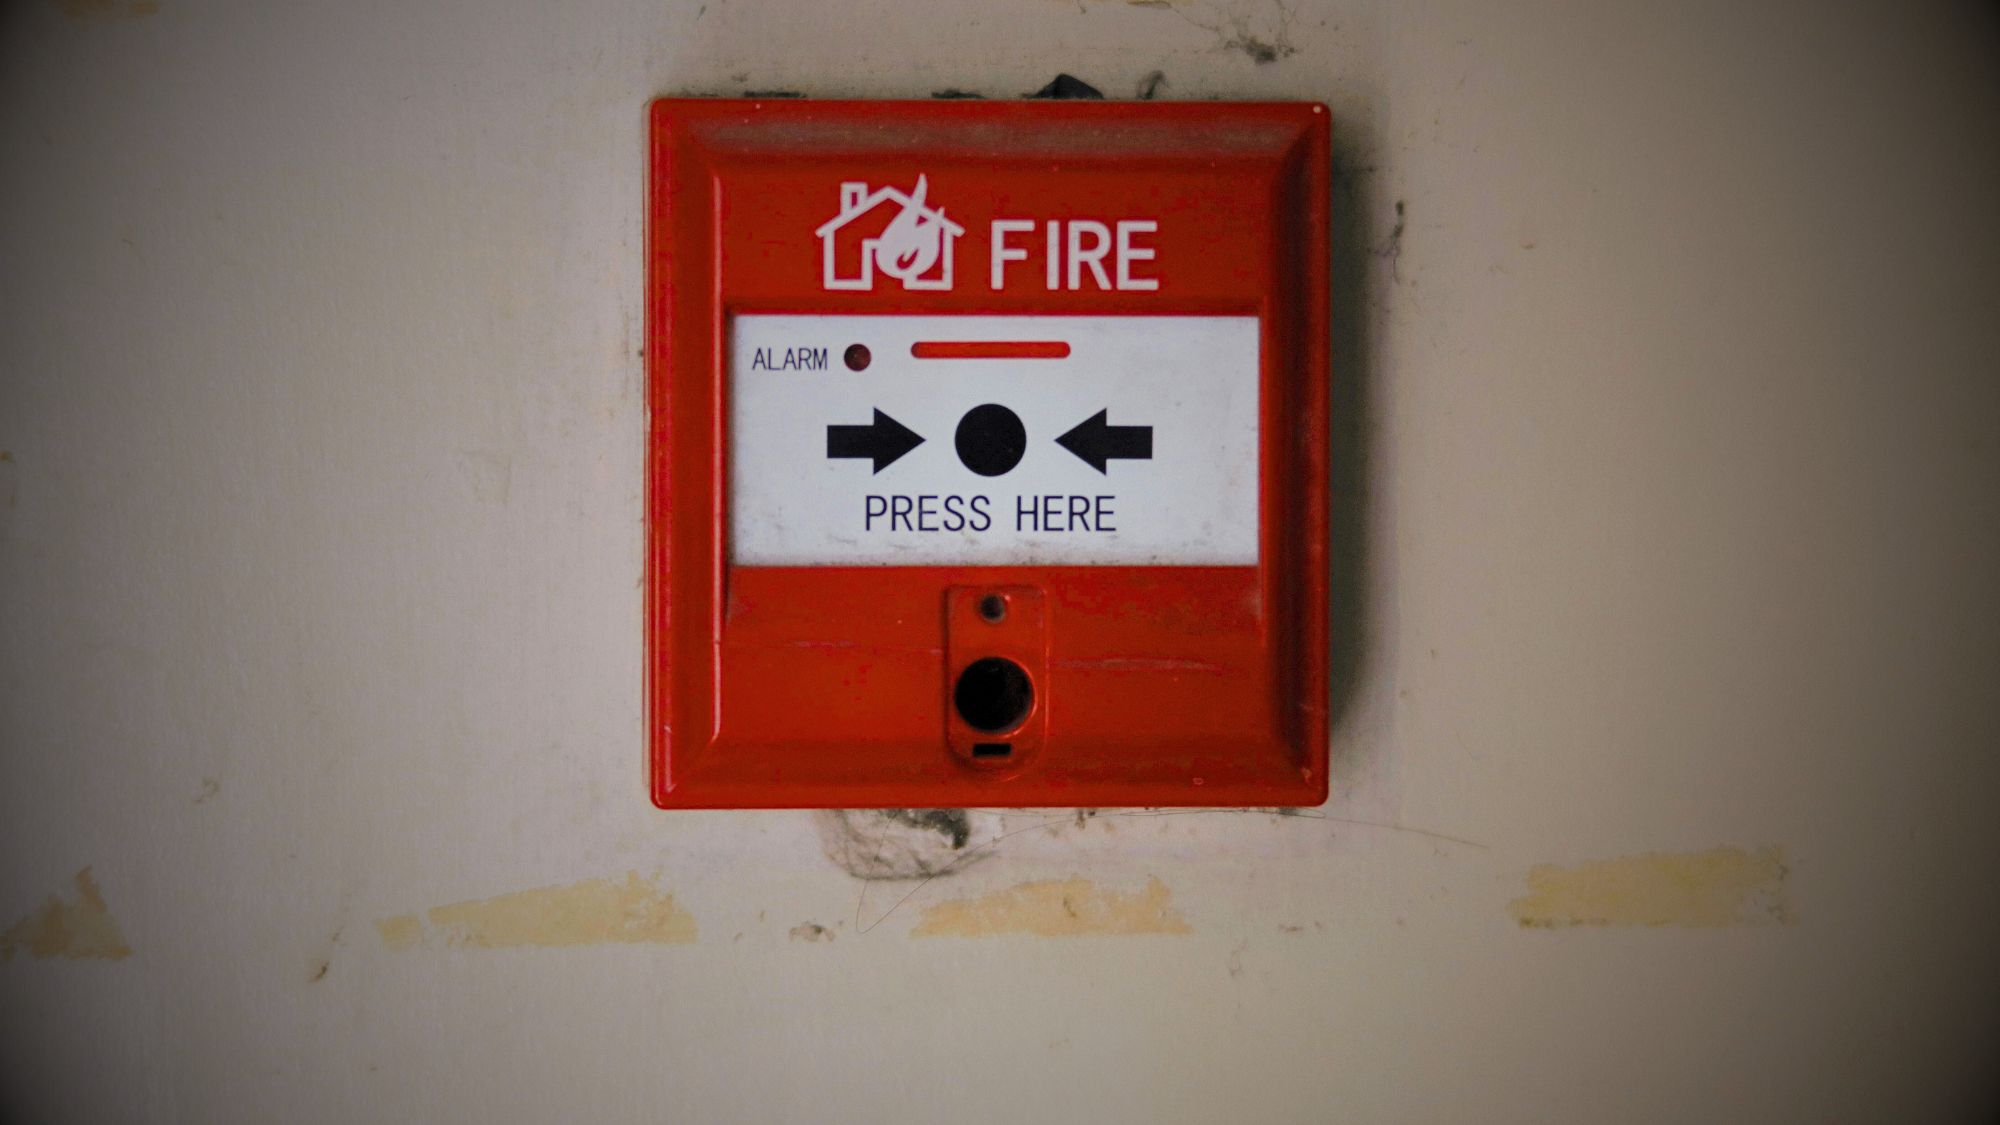 Fire alarm systems installed in a building, ready to alert occupants in case of fire